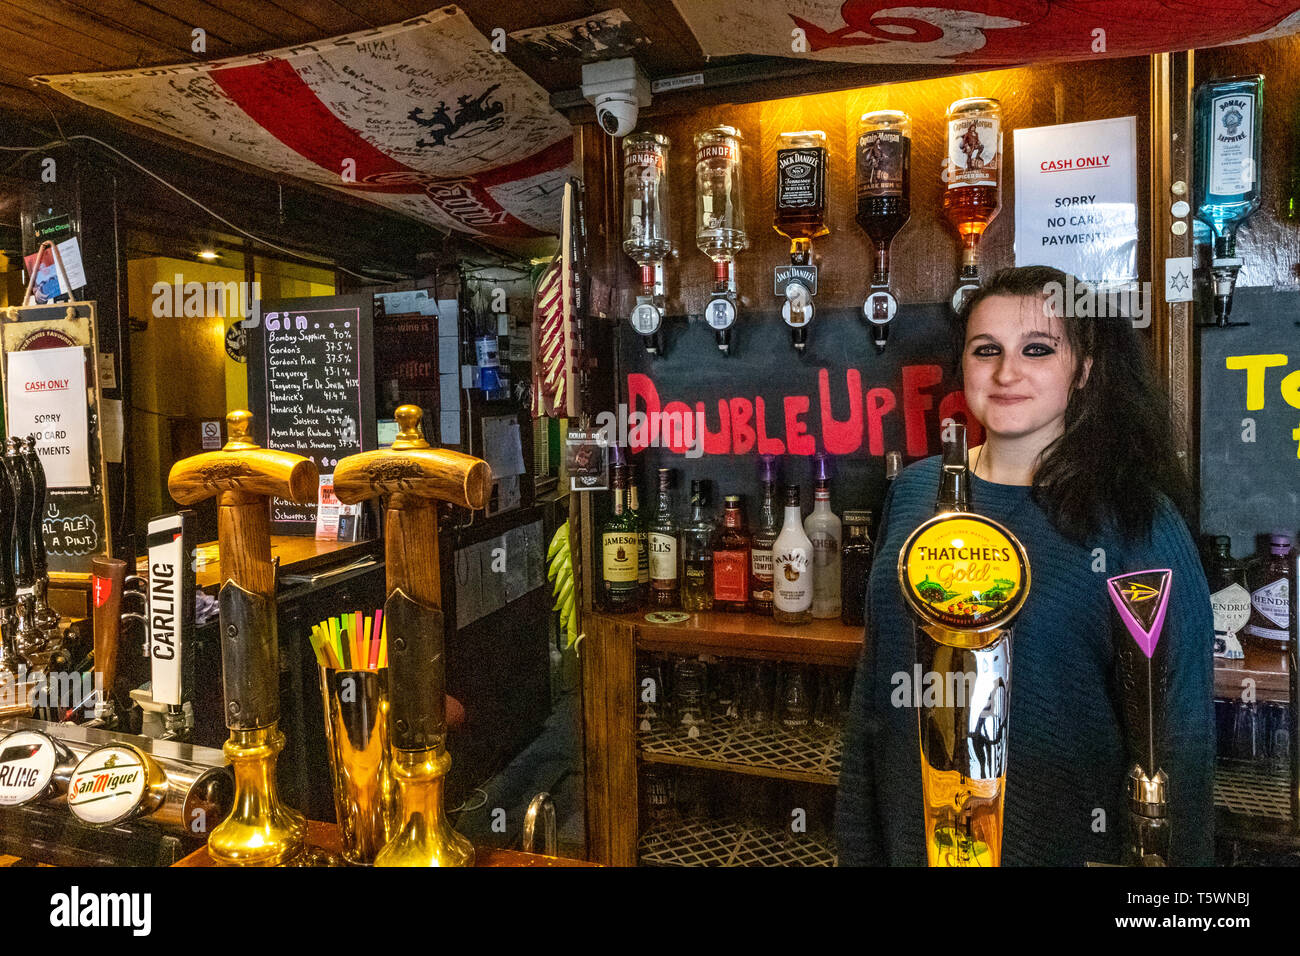 a-barmaid-at-the-five-alls-pub-poses-for-photographers-chepstow-street-and-people-T5WNBJ.jpg